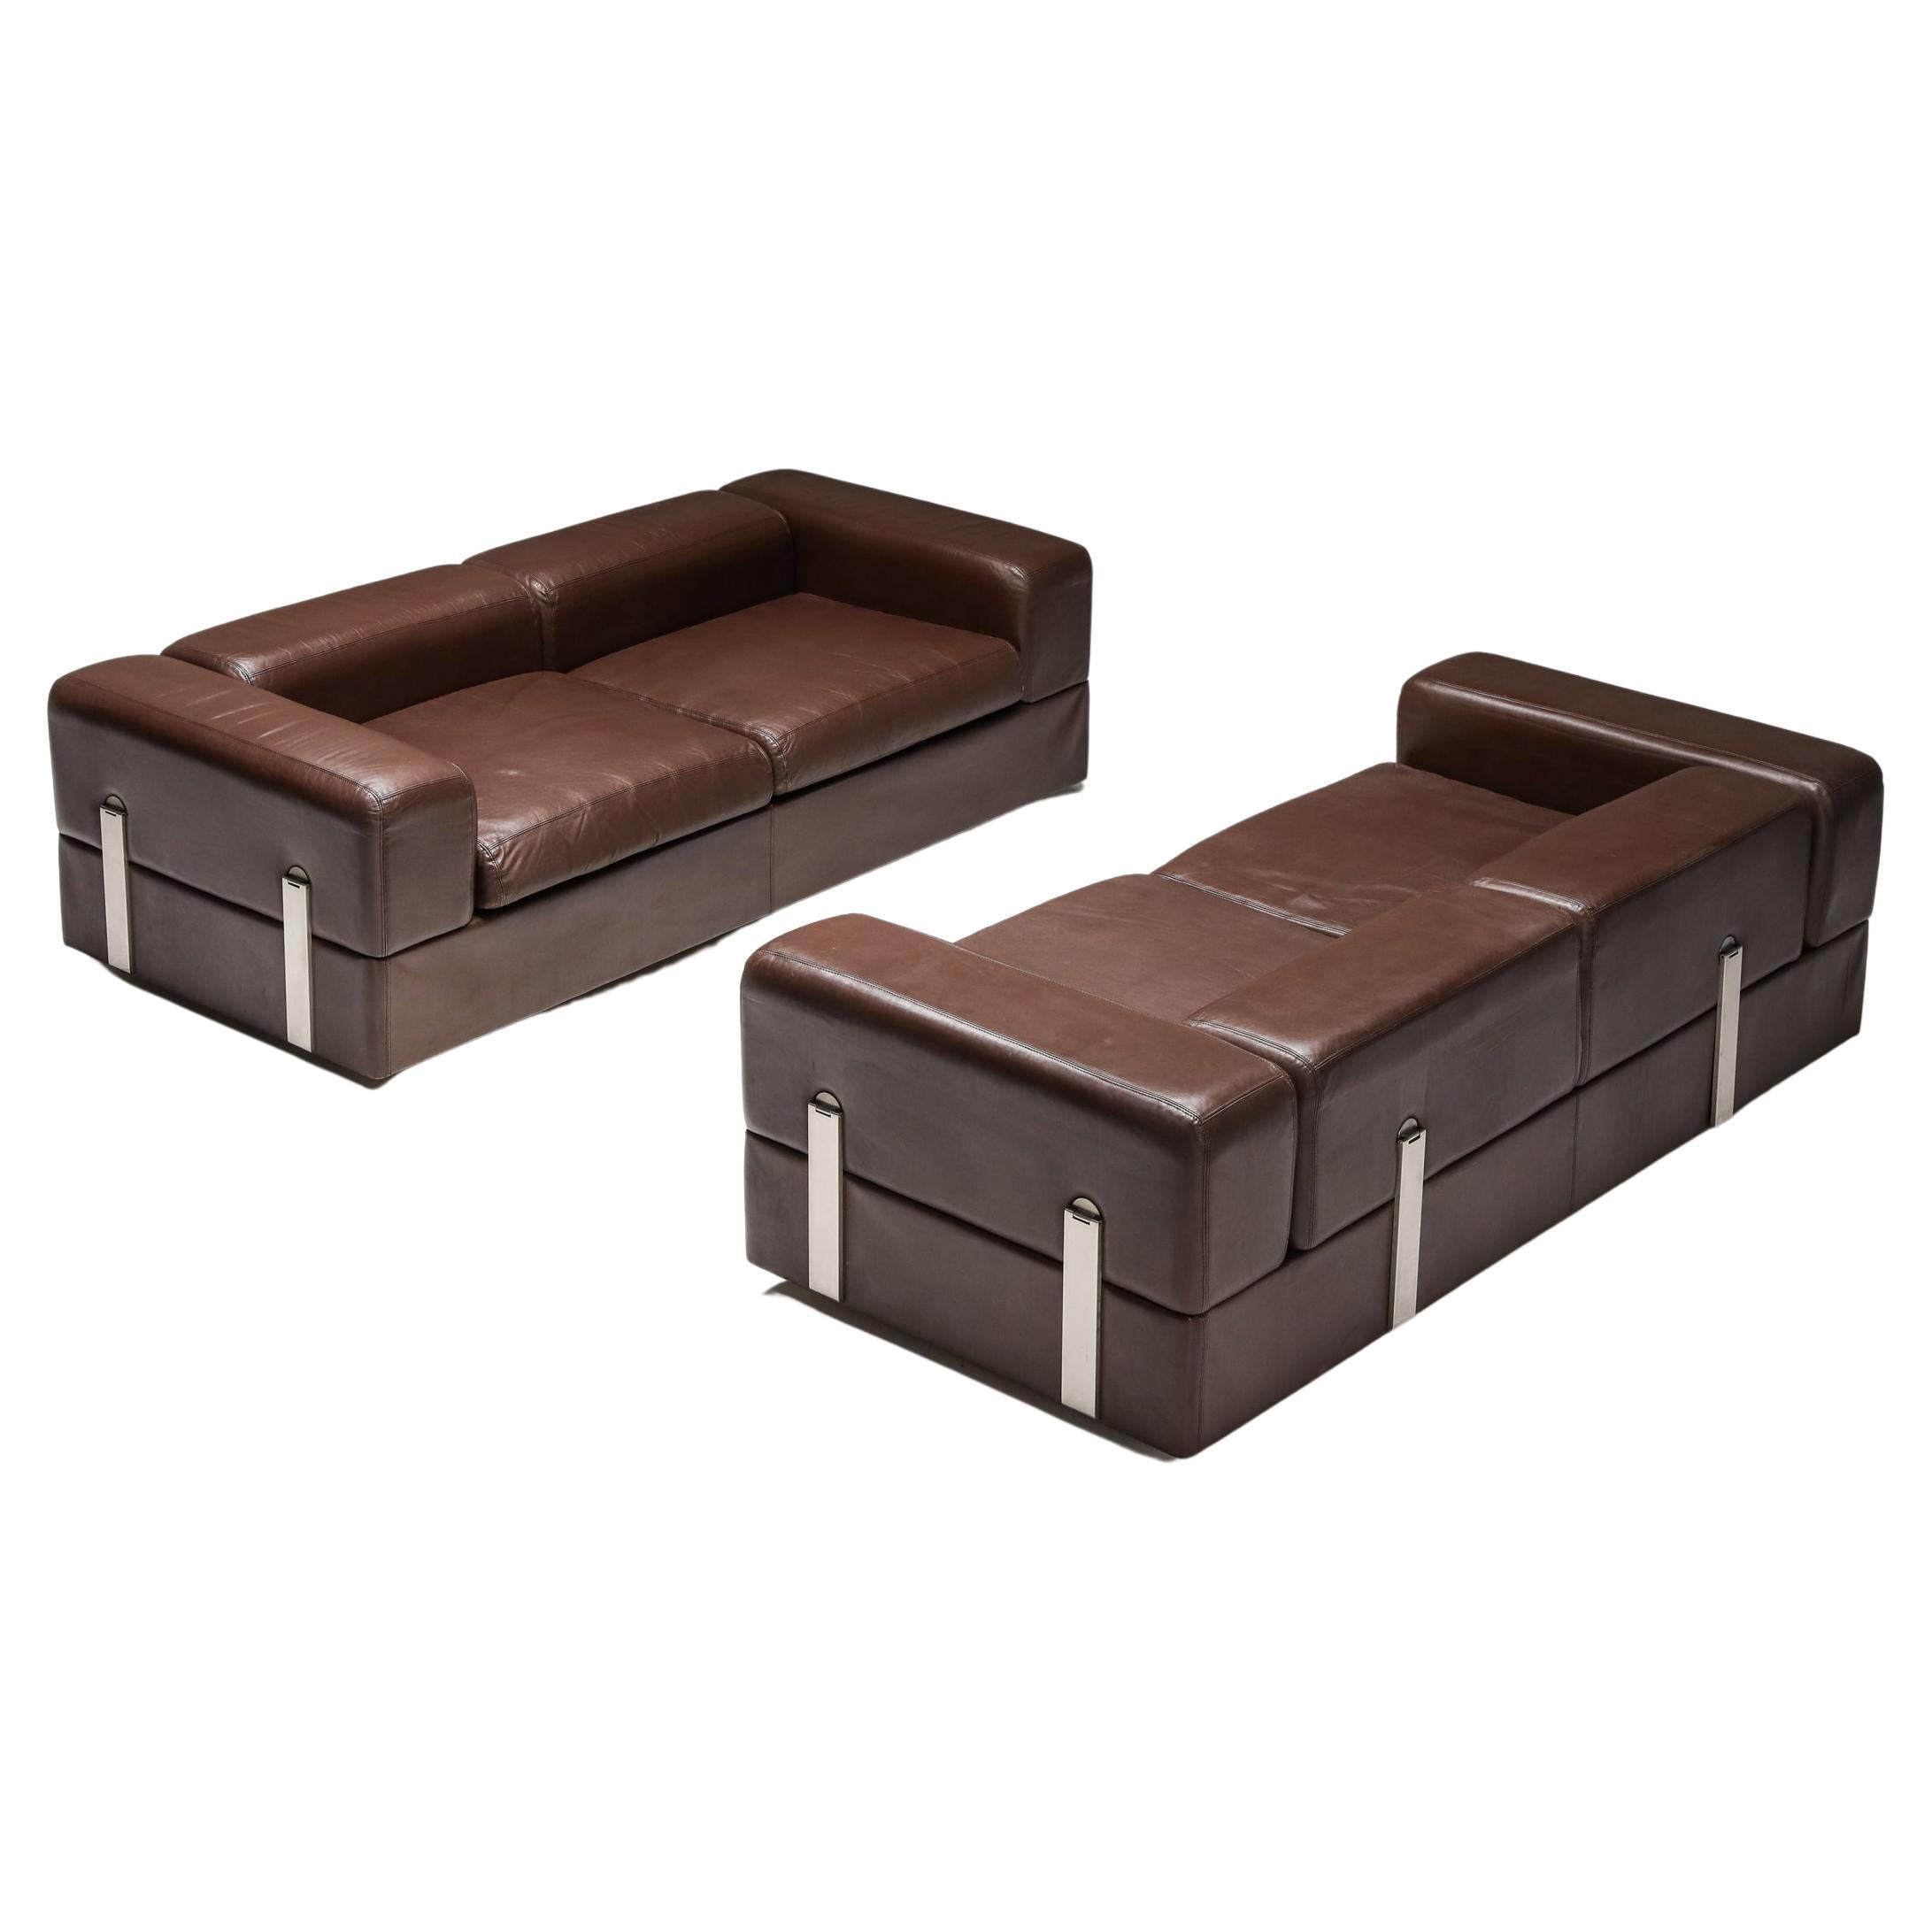 Post-Modern Daybed Sofa 711 by Tito Agnoli for Cinova in Brown Leather, 1960